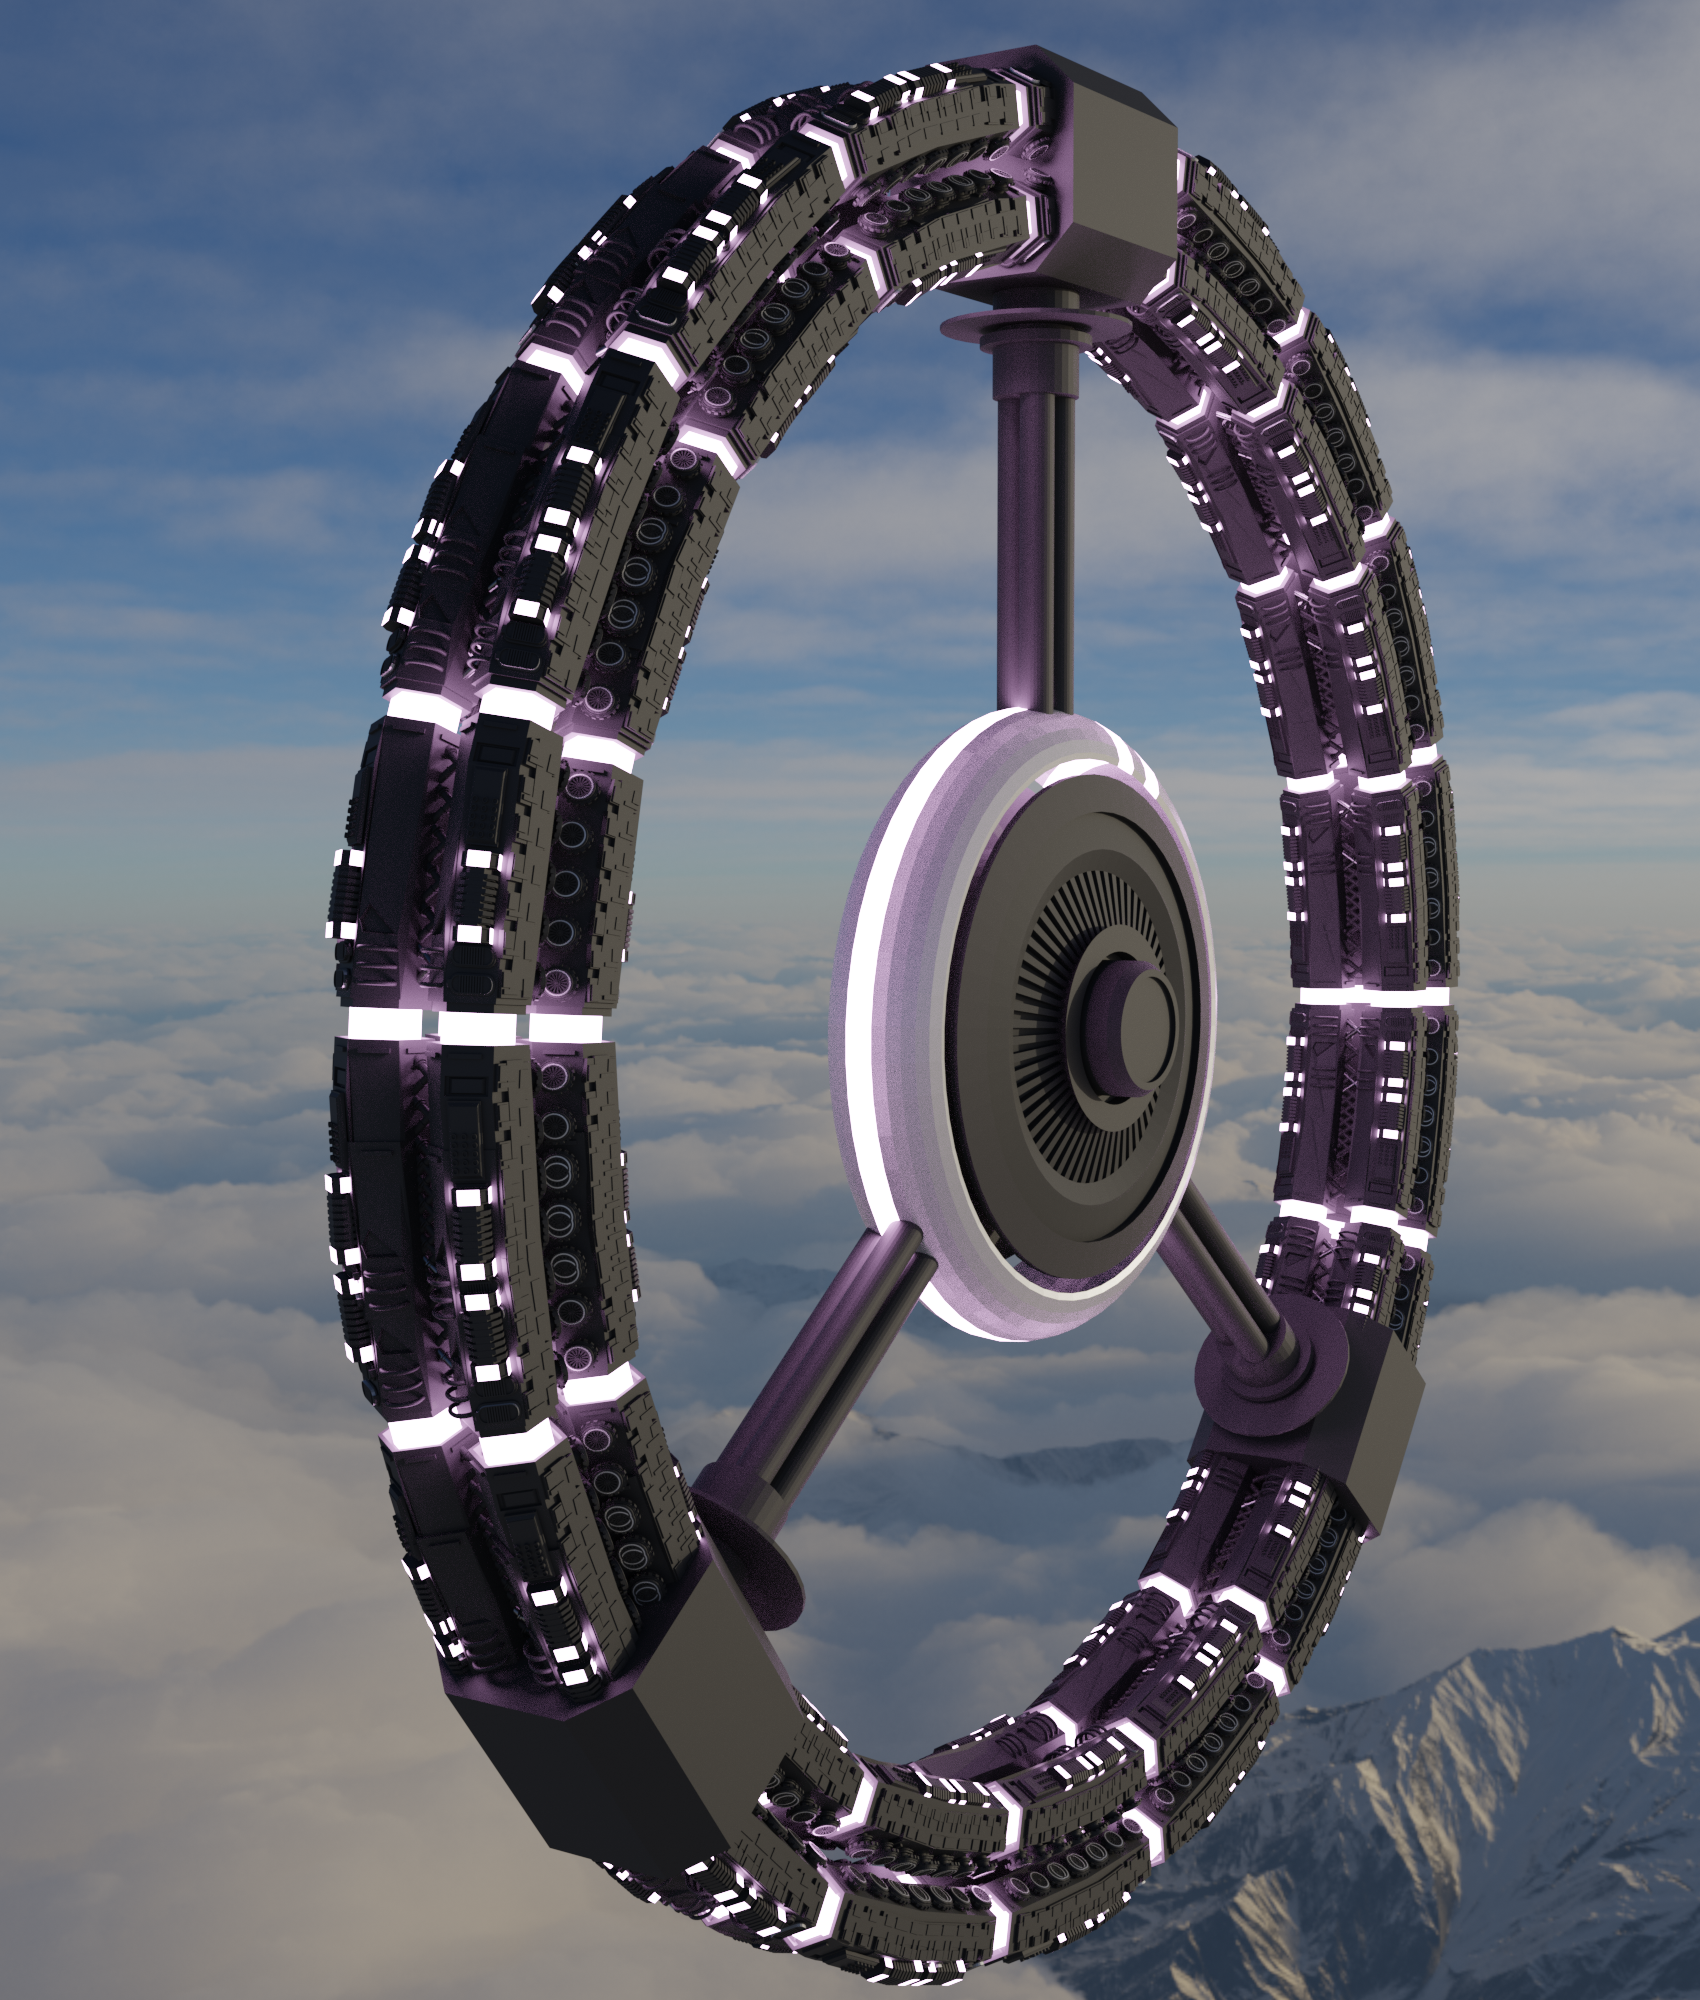 Let's render a space donut